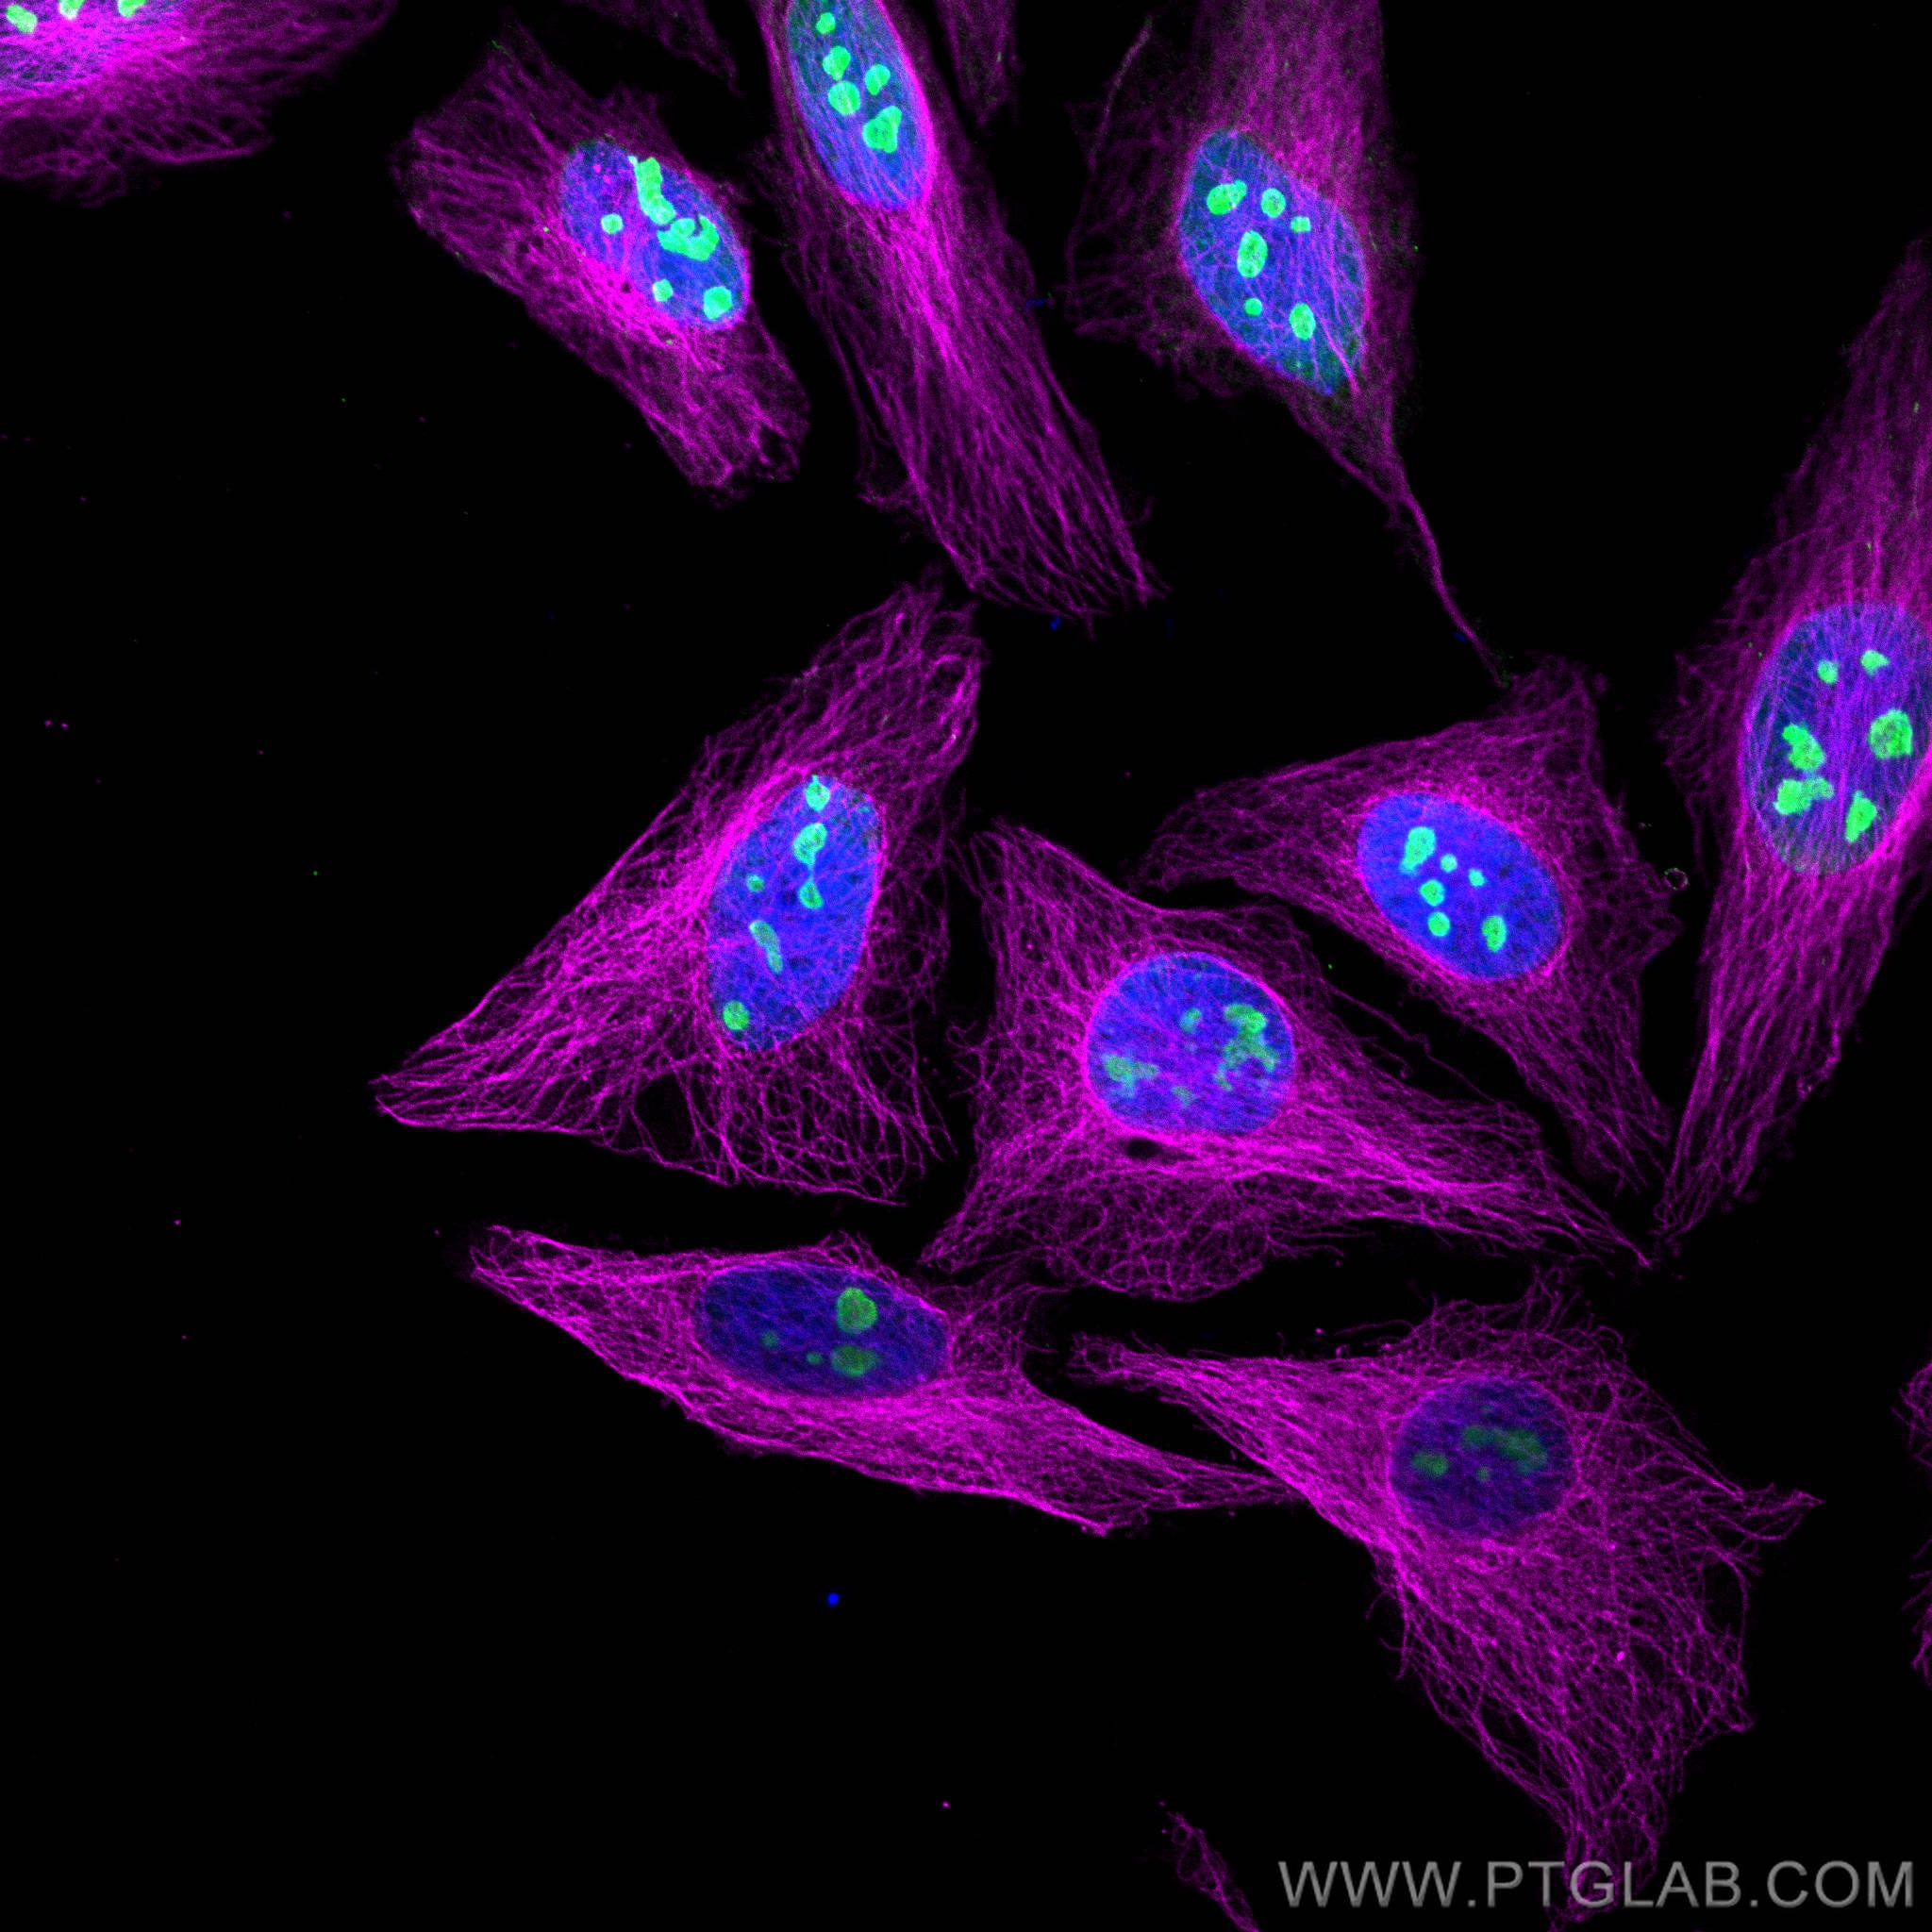 Immunofluorescence (IF) analysis of Hela cells stained with rabbit anti-Alpha Tubulin polyclonal antibody (11224-1-AP, magenta) and mouse anti-NPM1 monoclonal antibody (60096-1-Ig, green). Multi-rAb CoraLite® Plus 647-Goat Anti-Rabbit Recombinant Secondary Antibody (H+L) (RGAR005, 1:500) and Multi-rAb CoraLite® Plus 488-Goat Anti-Mouse Recombinant Secondary Antibody (H+L) (RGAM002, 1:500) were used for detection.